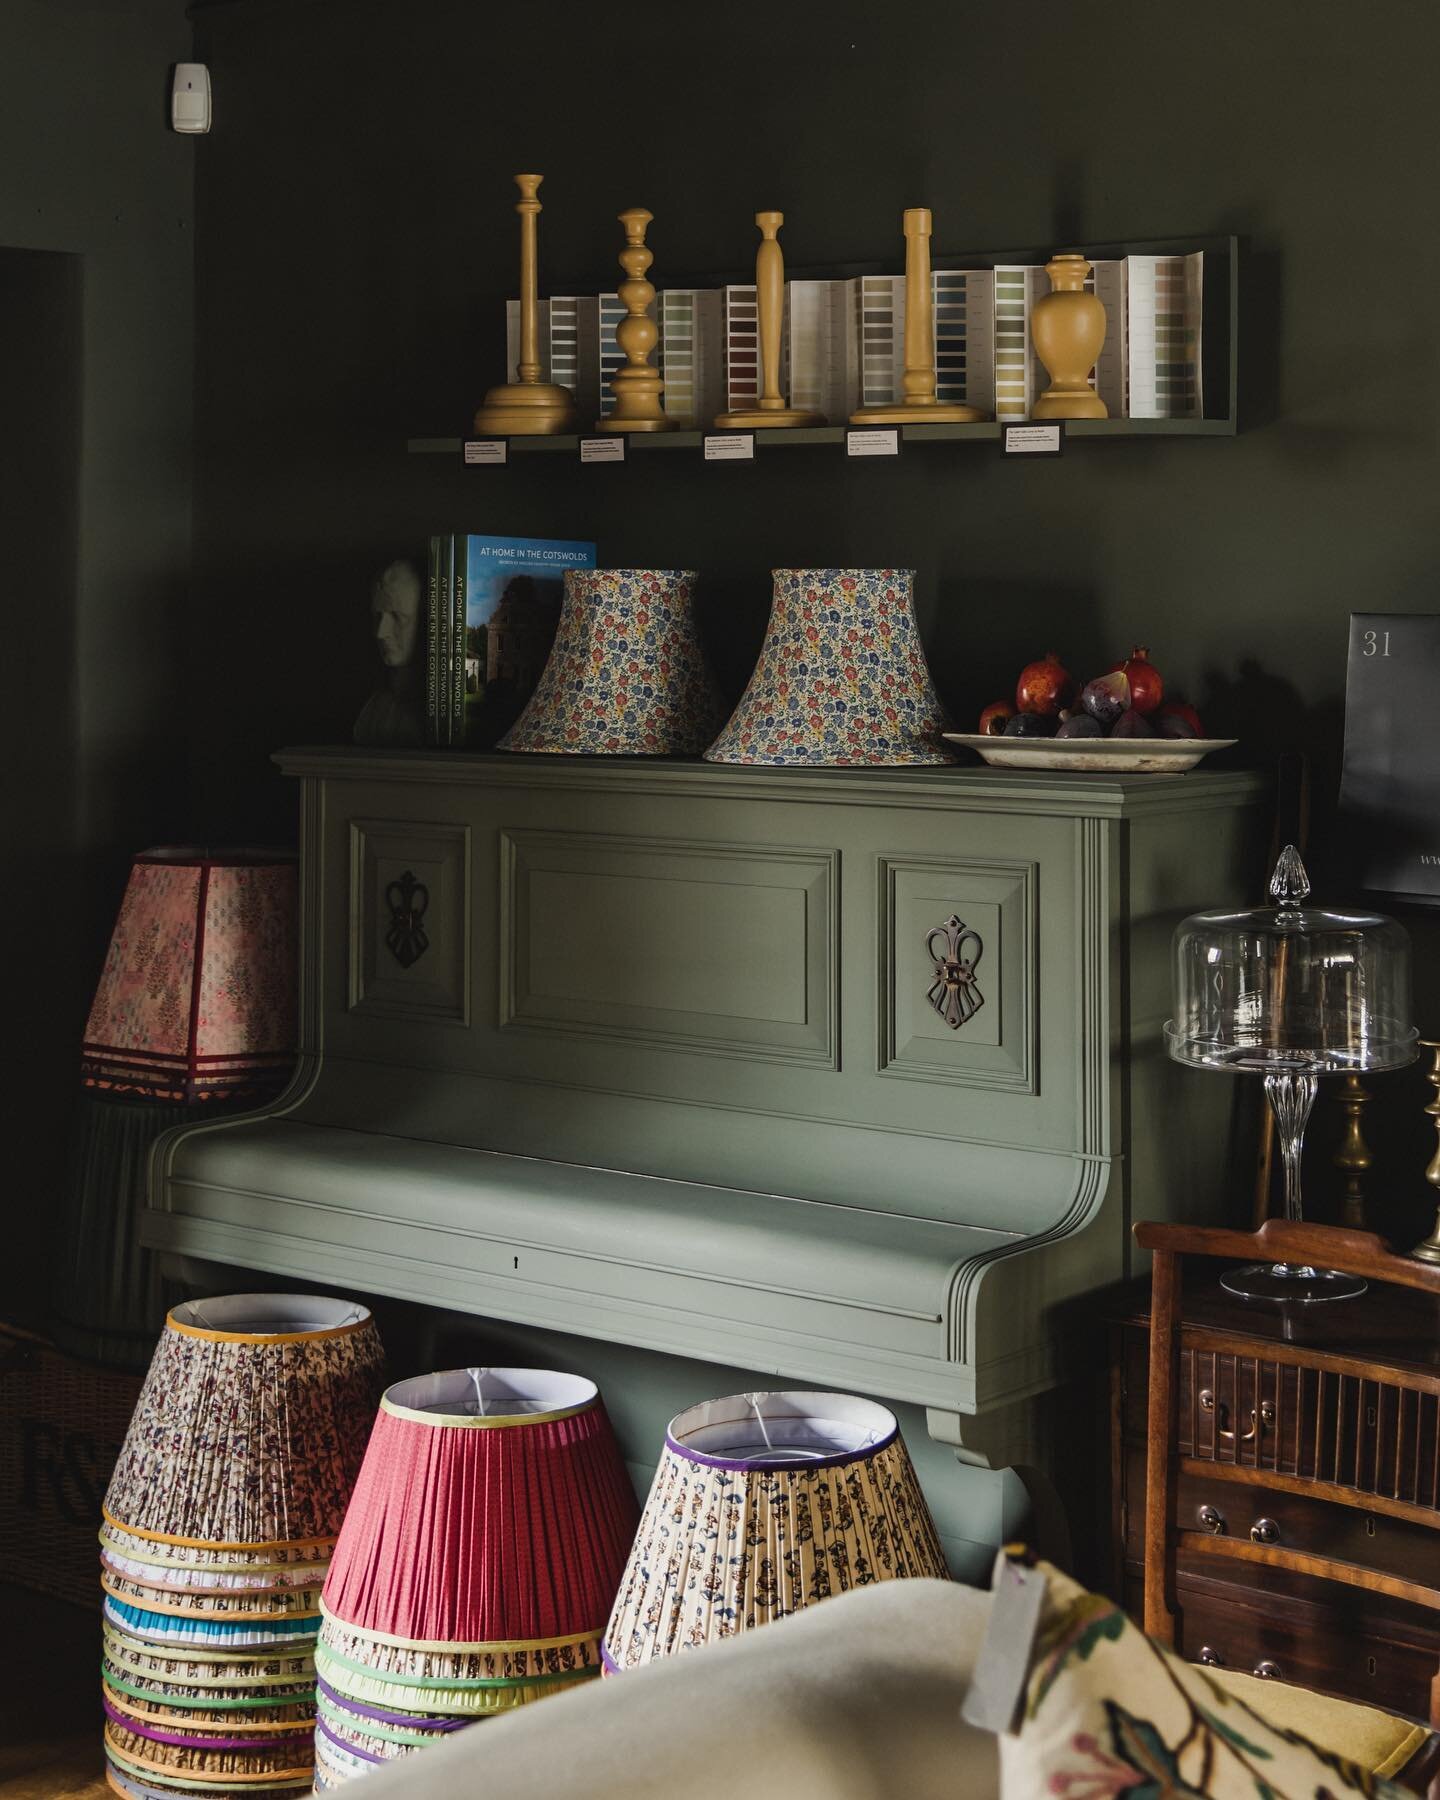 As well as a wide selection of gathered Indian sari shades ranging from sizes 14&rdquo; to 22&rdquo; we now produce bespoke lampshades to order. Please feel free to drop us a line or pop in to have a chat. 

Photo - @paul_whitbread_photo 

#noble #no